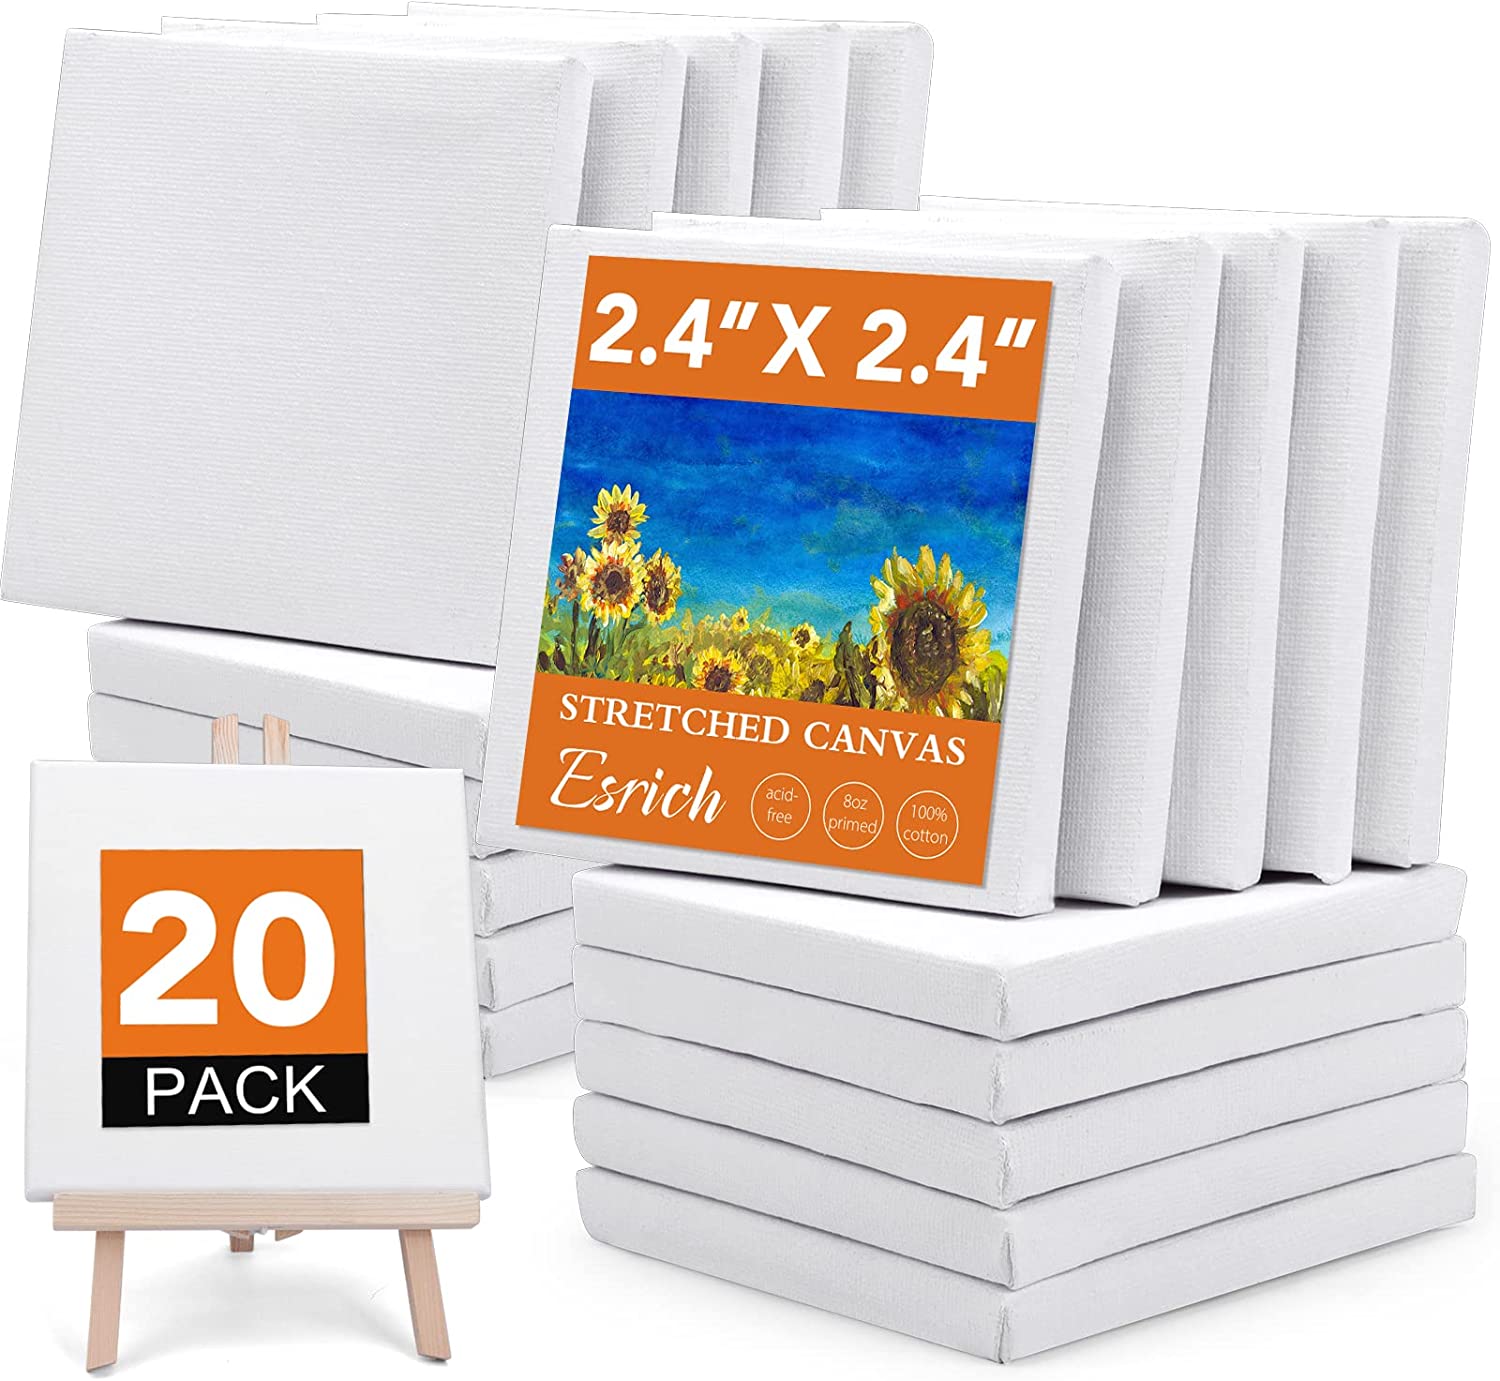 SL crafts Mini Stretched Canvas 4X4 ( 6 Mini Canvases) by SL crafts